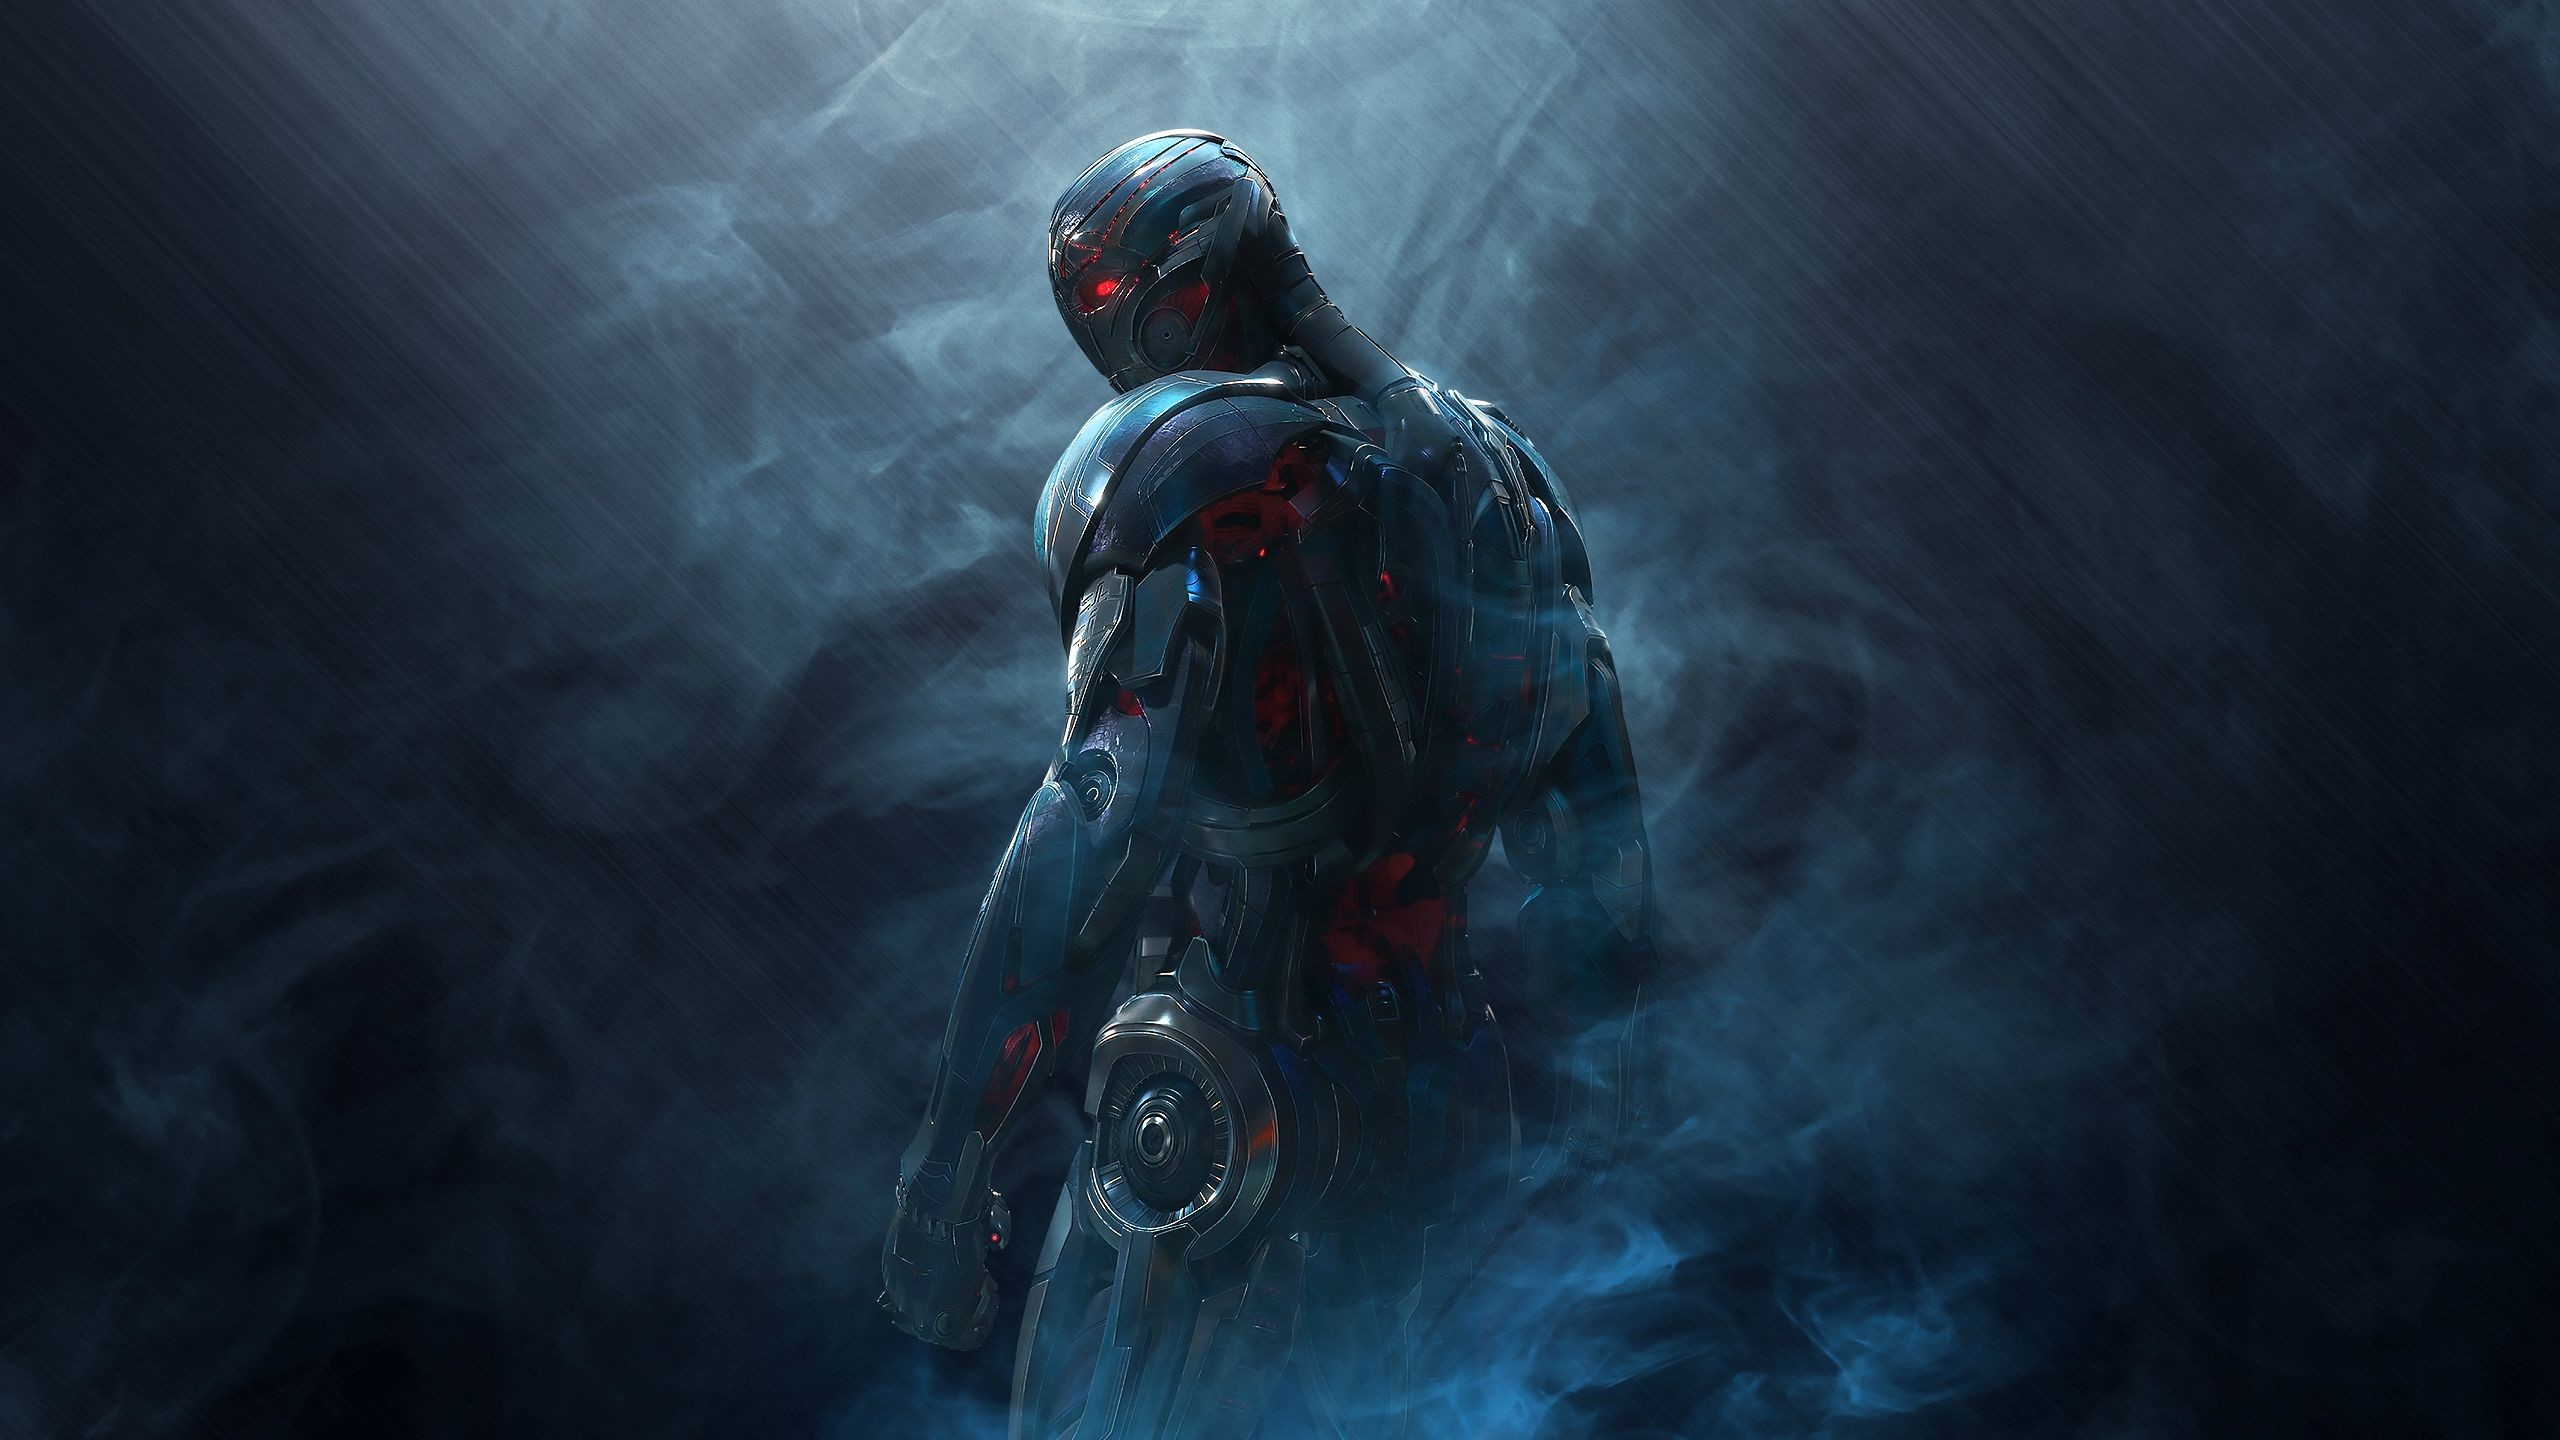 2560x1440 Avengers Wallpaper Mobile On Wallpaper Hd 2560 x 1440 px 1.08 MB age of  ultron hd